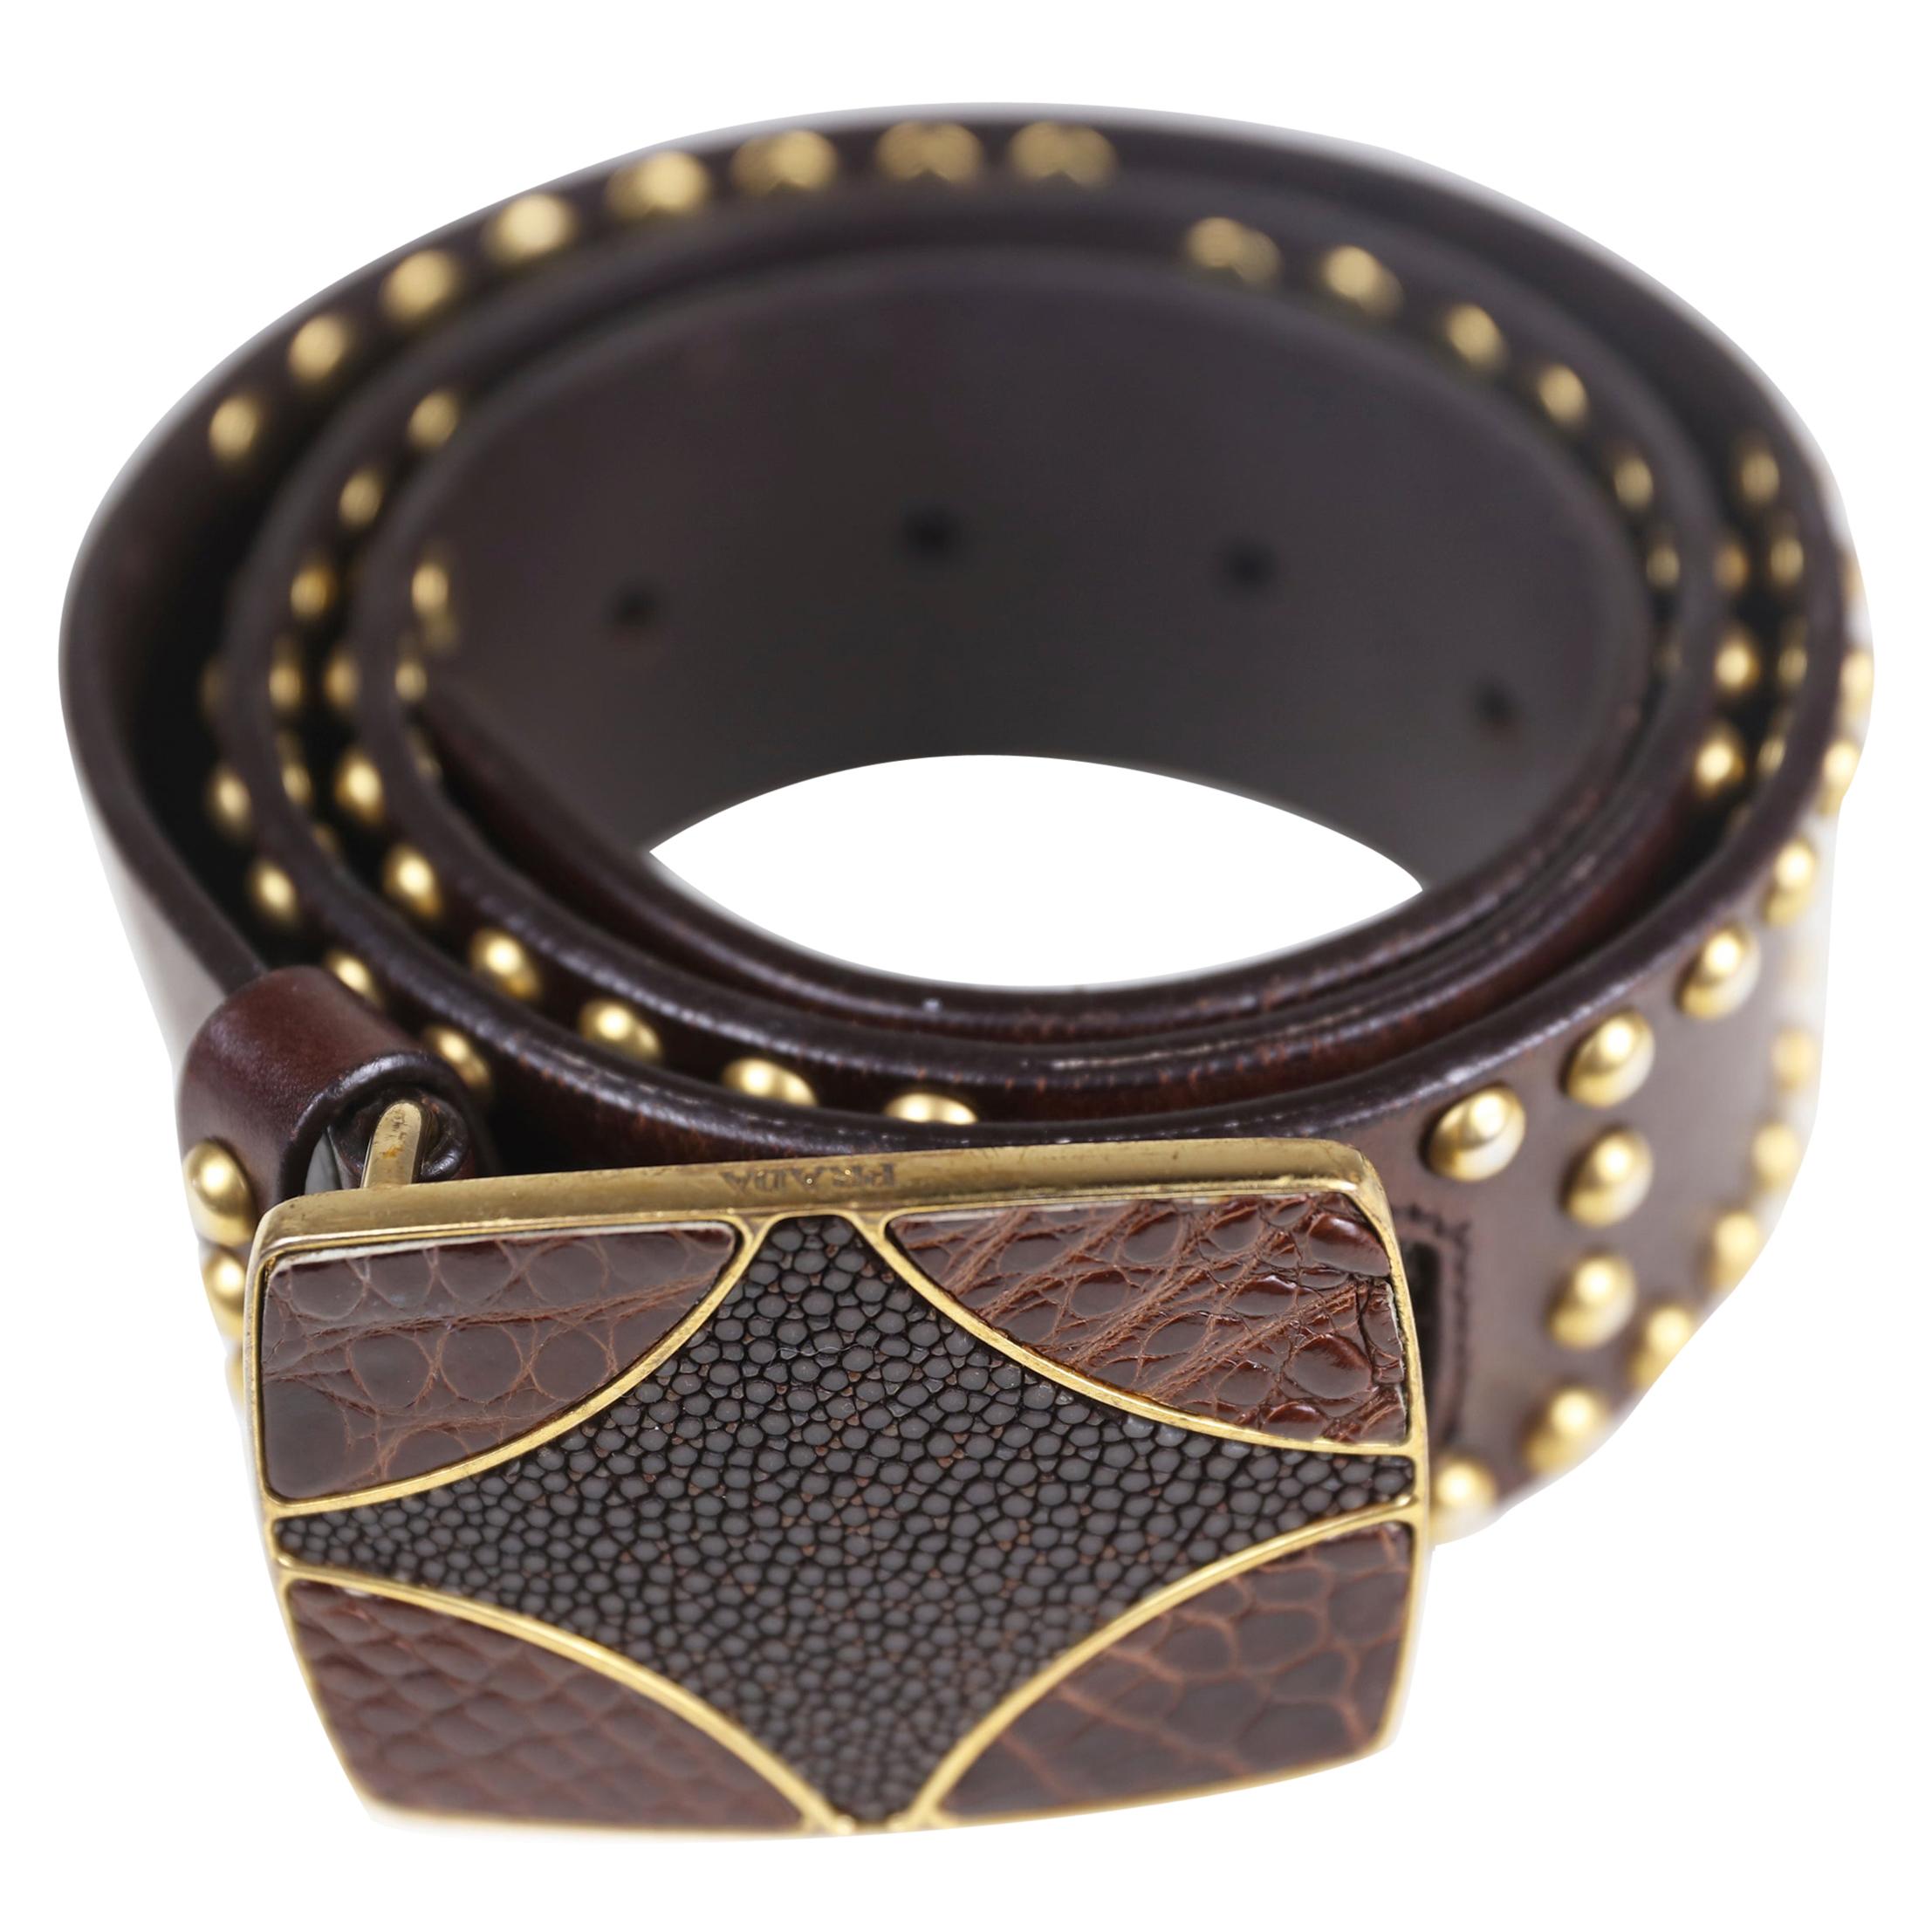 Prada Brown Size 32 Leather Studded Belt with Buckle